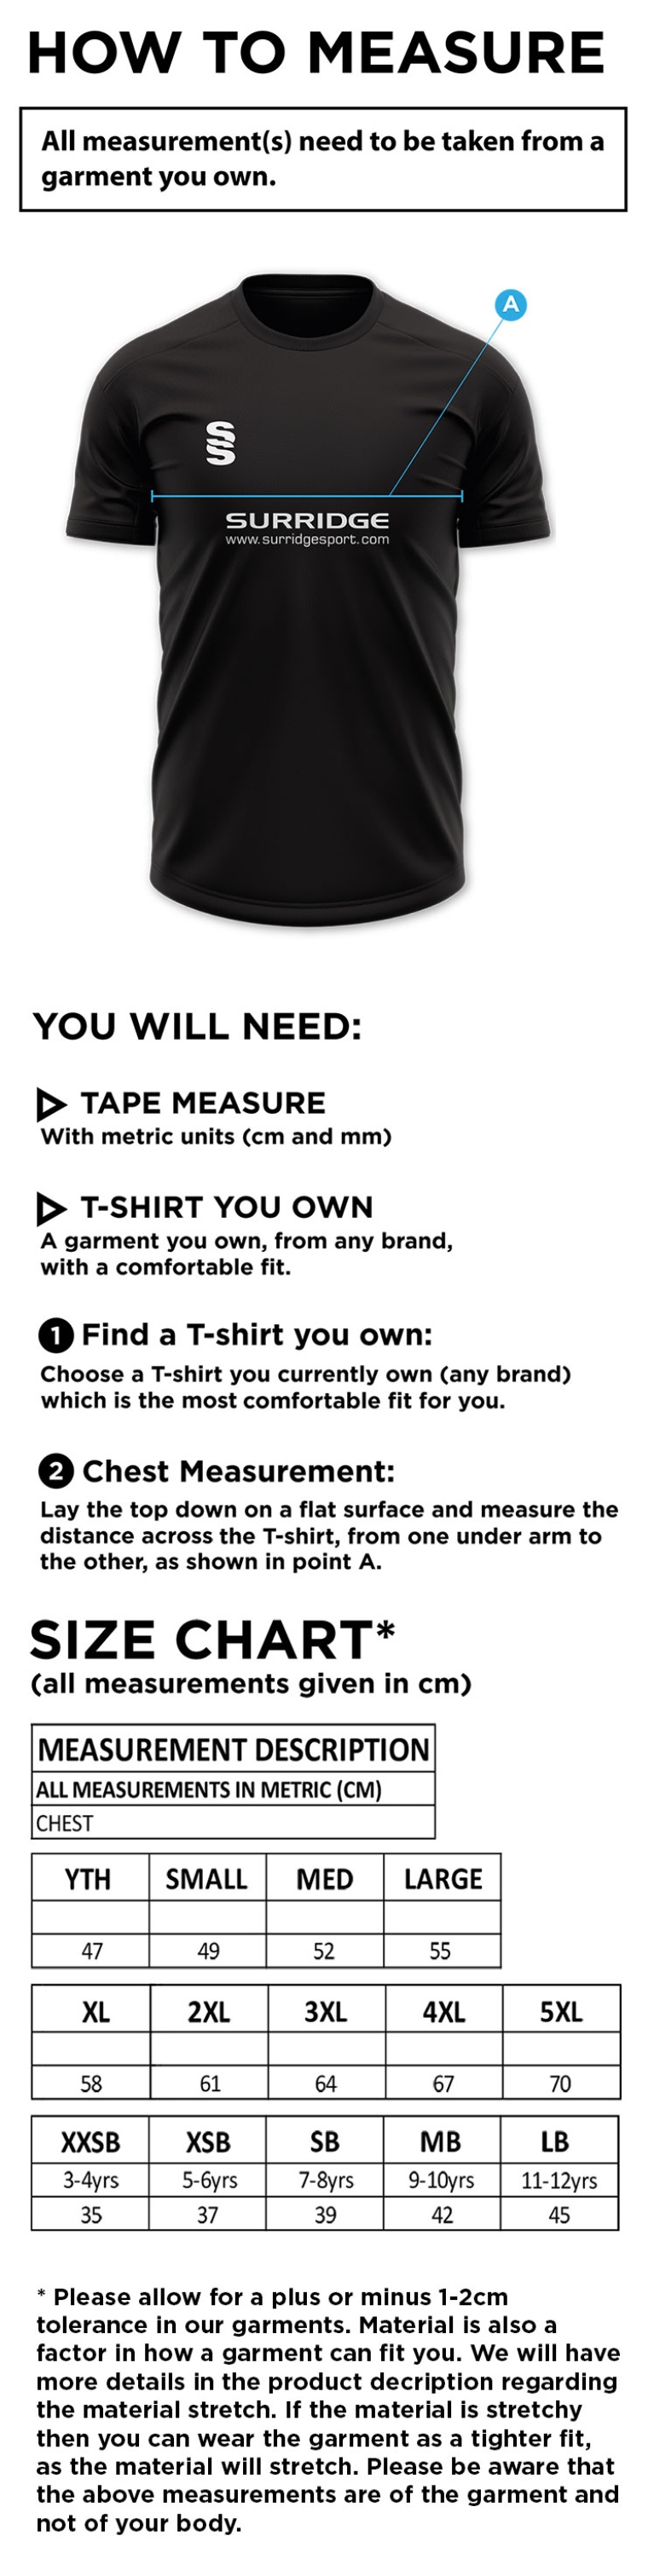 Youth's Dual Games Shirt : Maroon - Size Guide